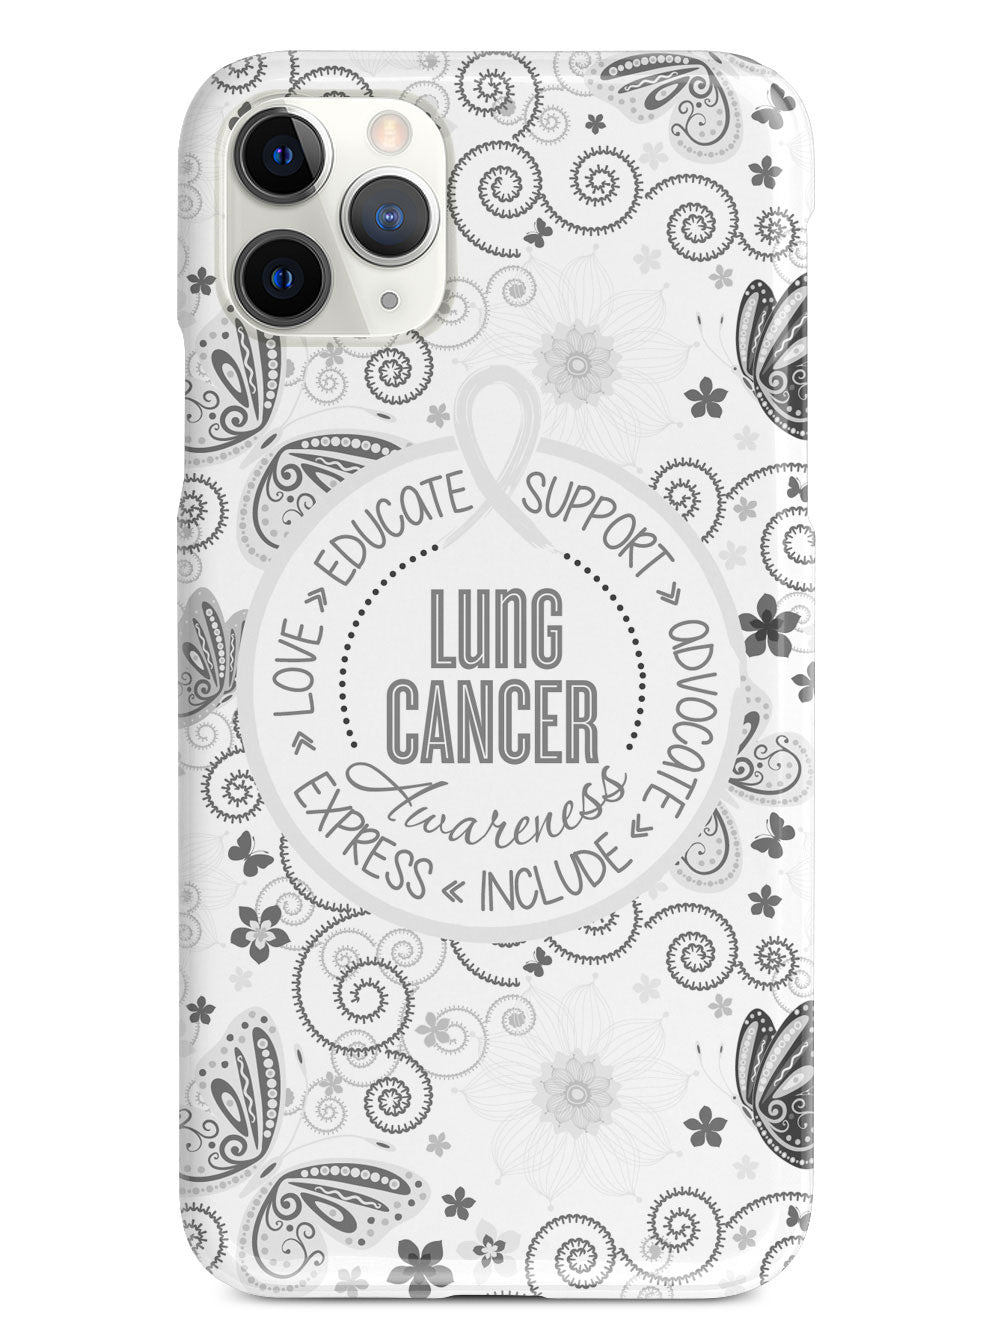 Lung Cancer - Butterfly Pattern Case